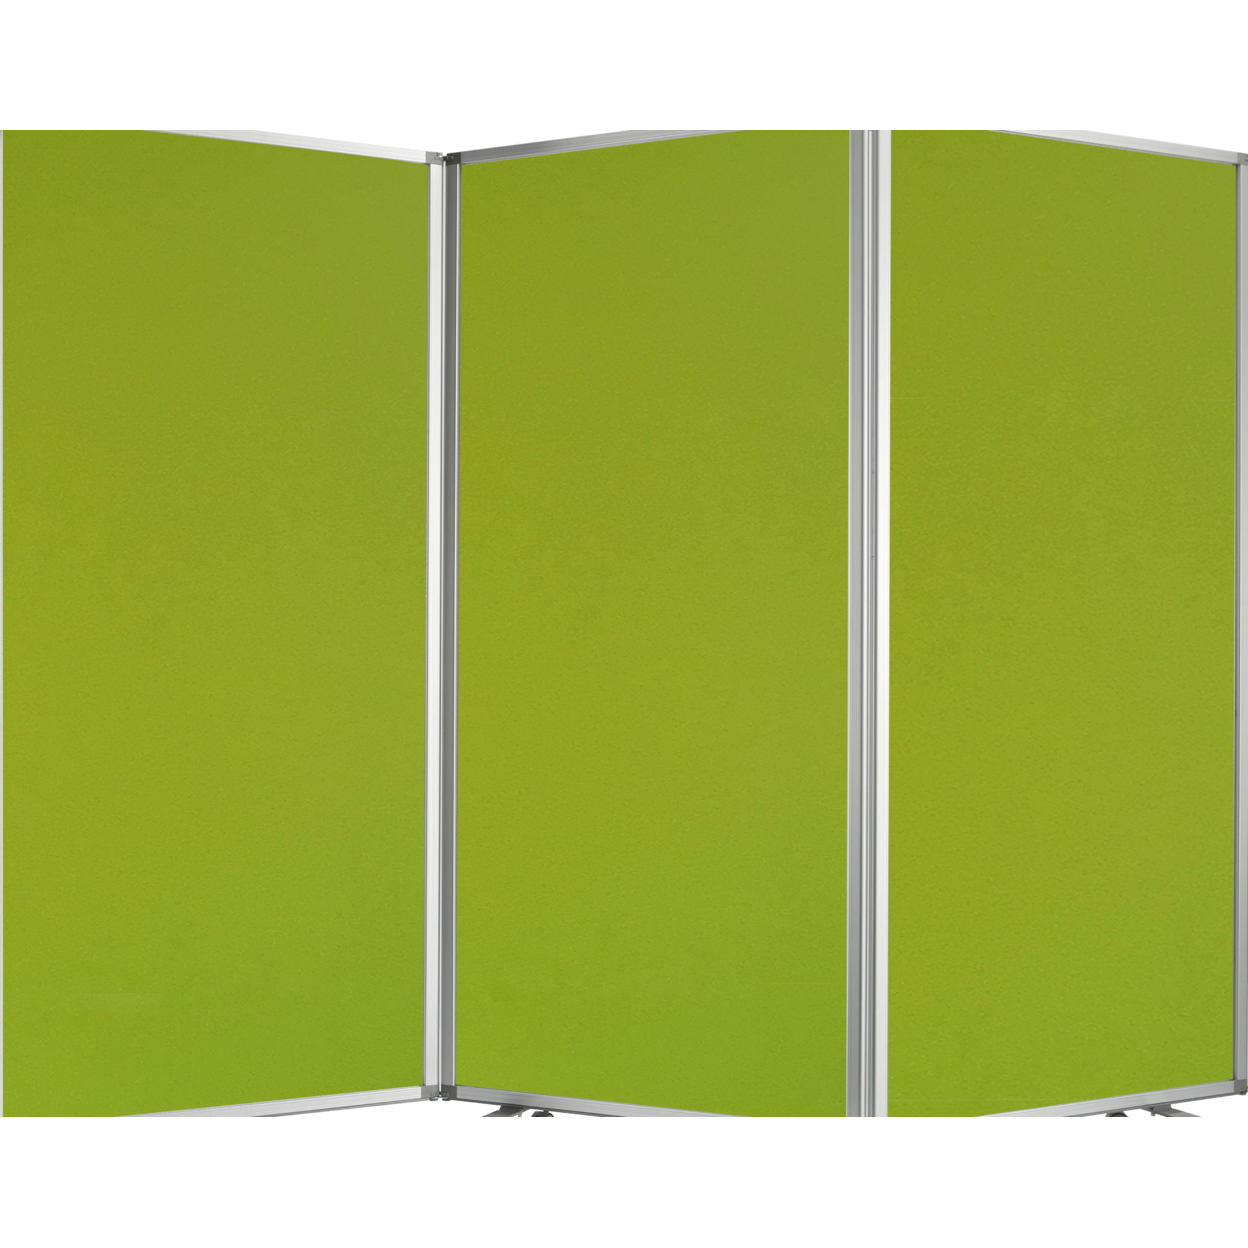 Accordion Style Fabric Upholstered 3 Panel Room Divider, Green And Gray- Saltoro Sherpi